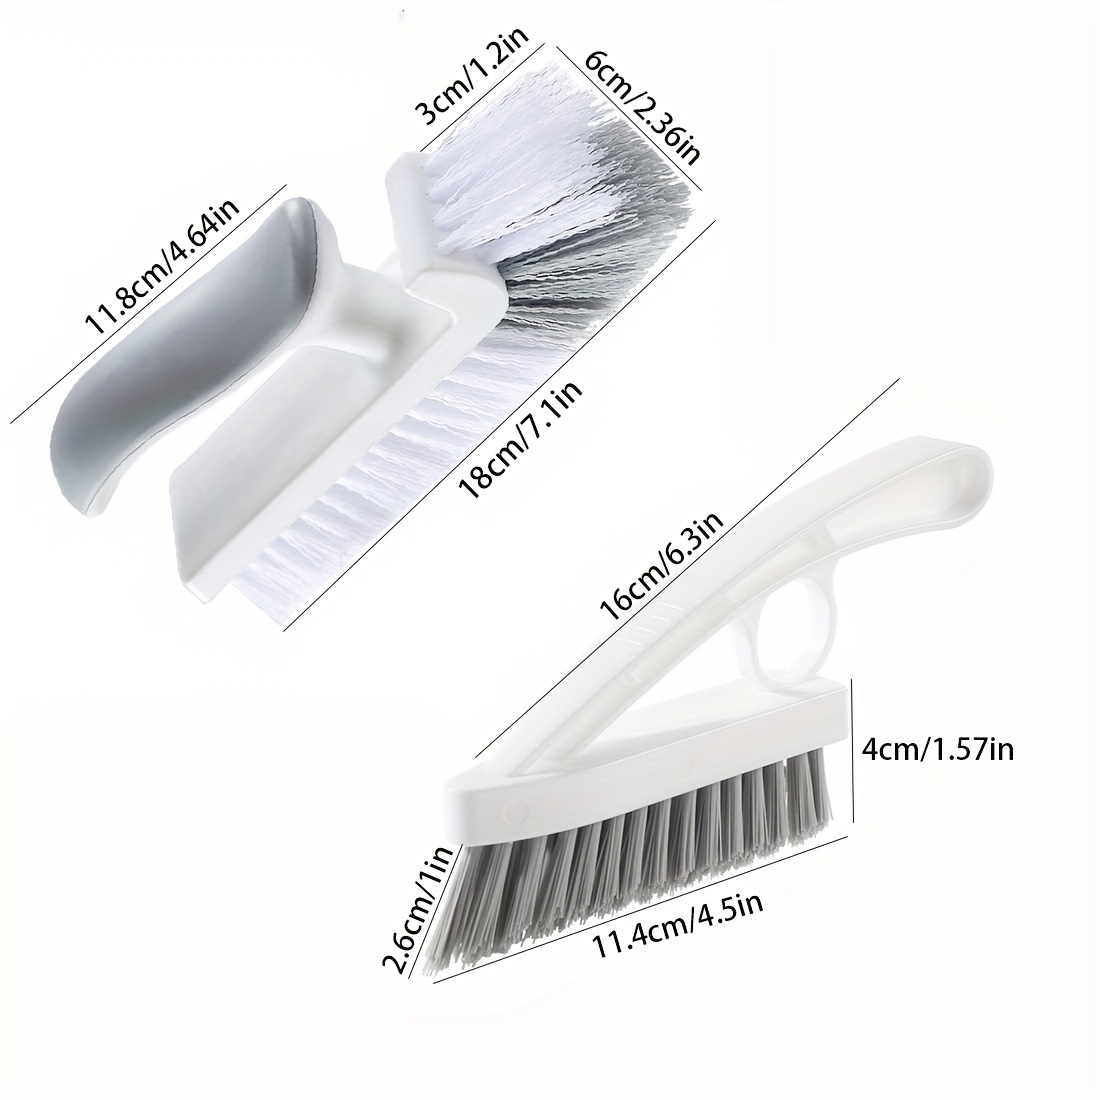 Black Color Bathroom Hard Bristle Crevice Cleaning Brush Household